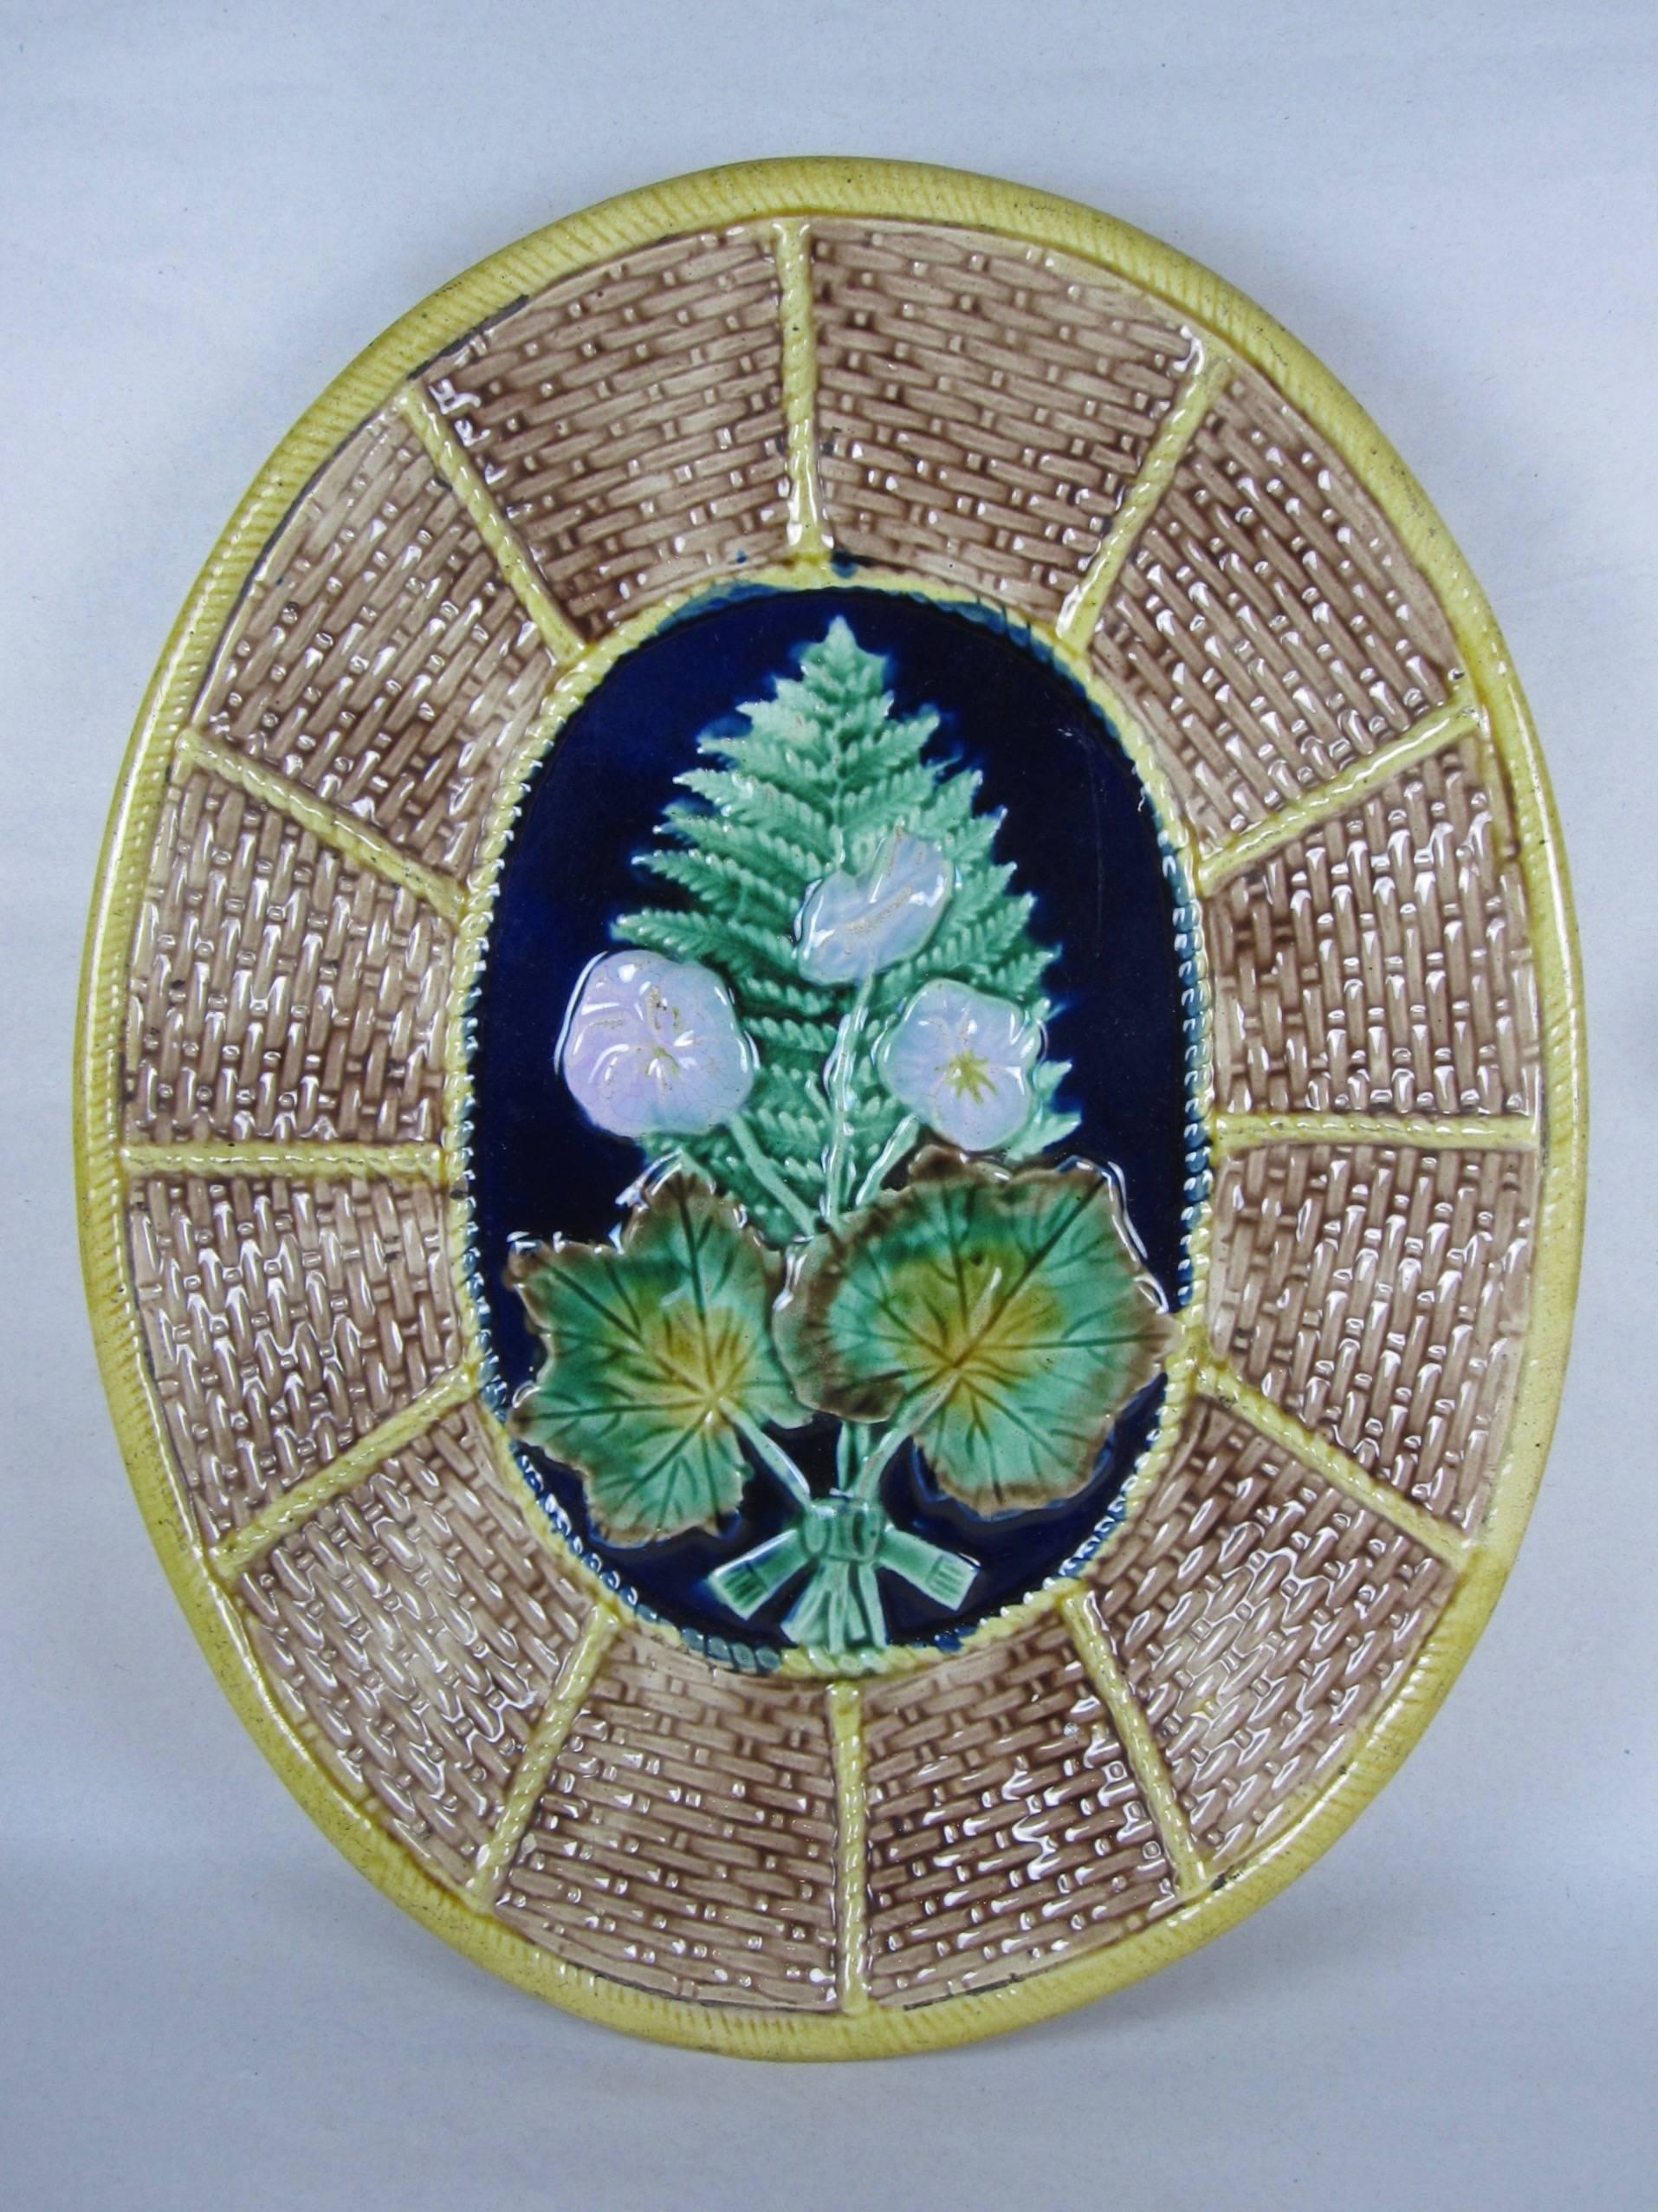 In incredible antique condition, a 19th century English Majolica glazed oval serving platter or cheese board, Adams & Bromley.

Showing a fern and floral pattern on a woven basket ground. The woven wicker motif is commonly seen in platters made for